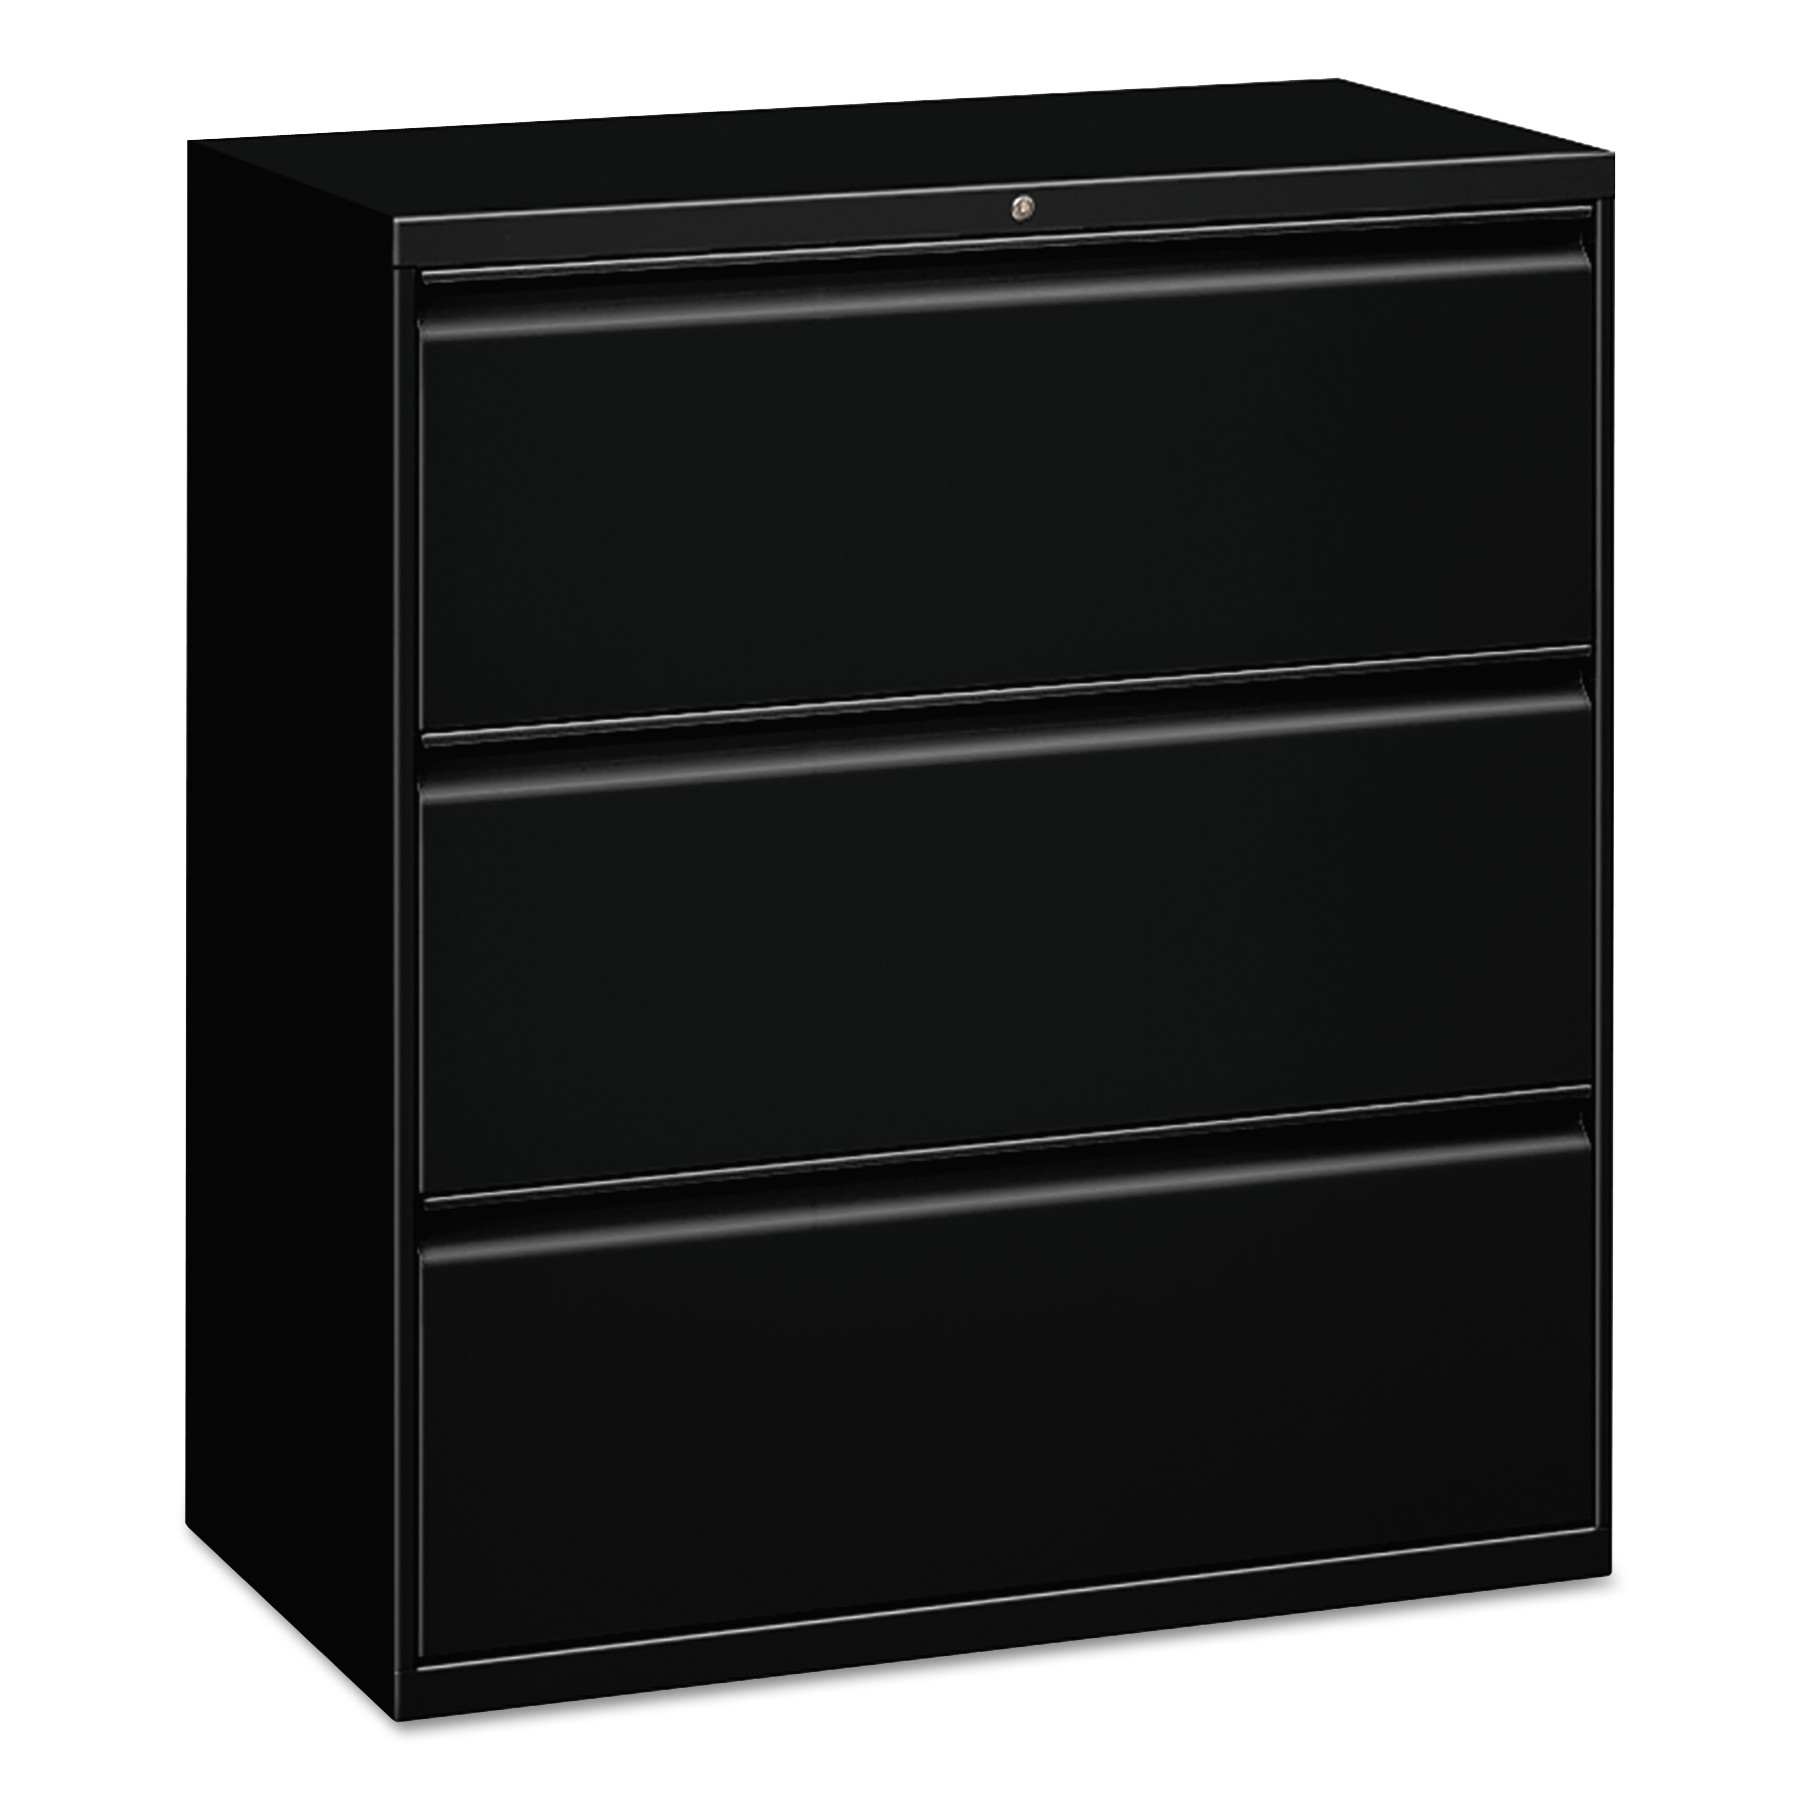 Alera Three-drawer Lateral File Cabinet, 30w X 18d X 39.5h, Black - image 1 of 2